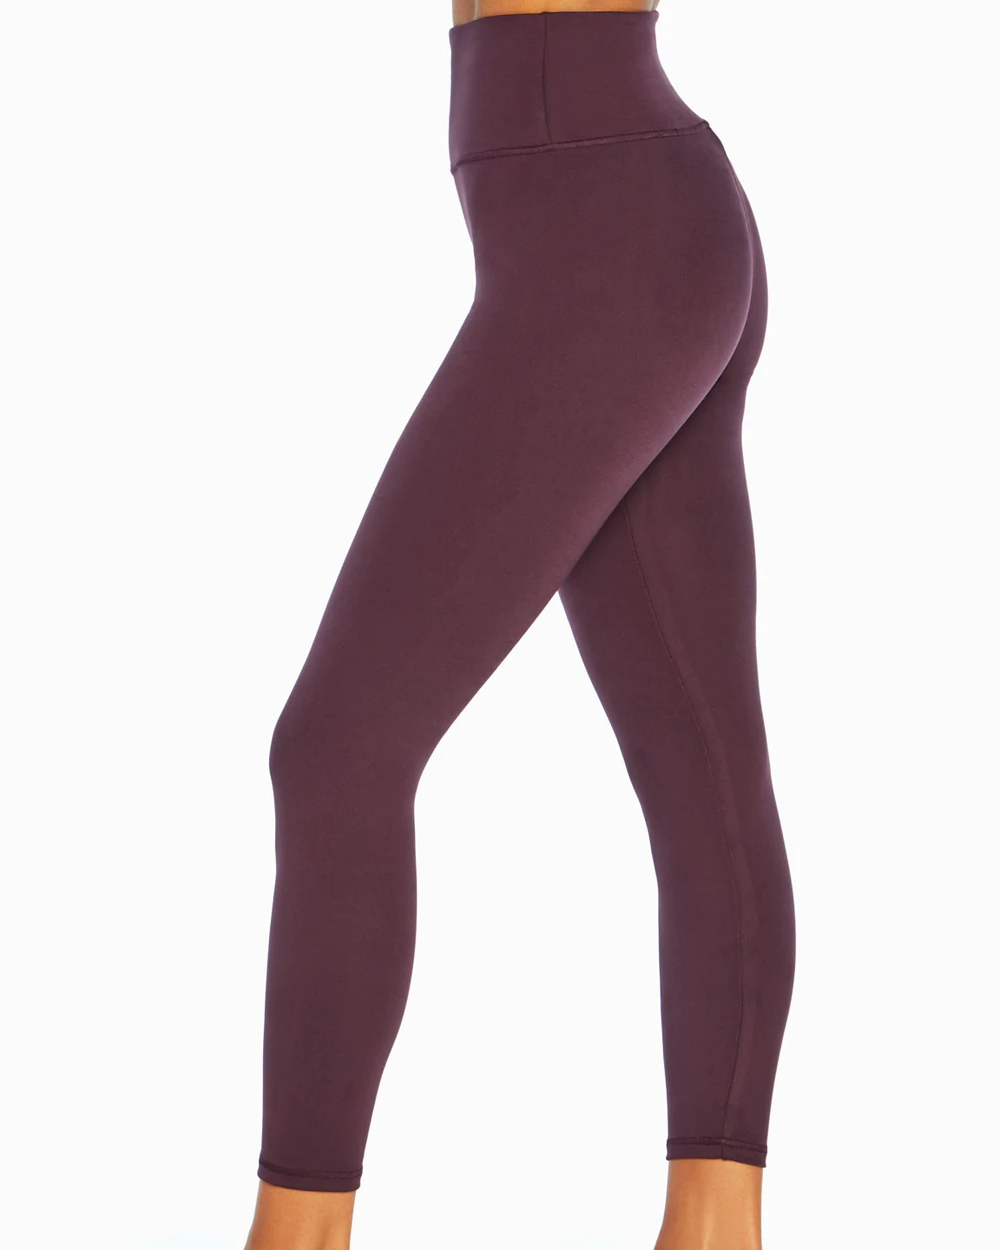 Balance Athletica The Cloud Pant Burgundy leggings Size XXL - $40 - From  Emily